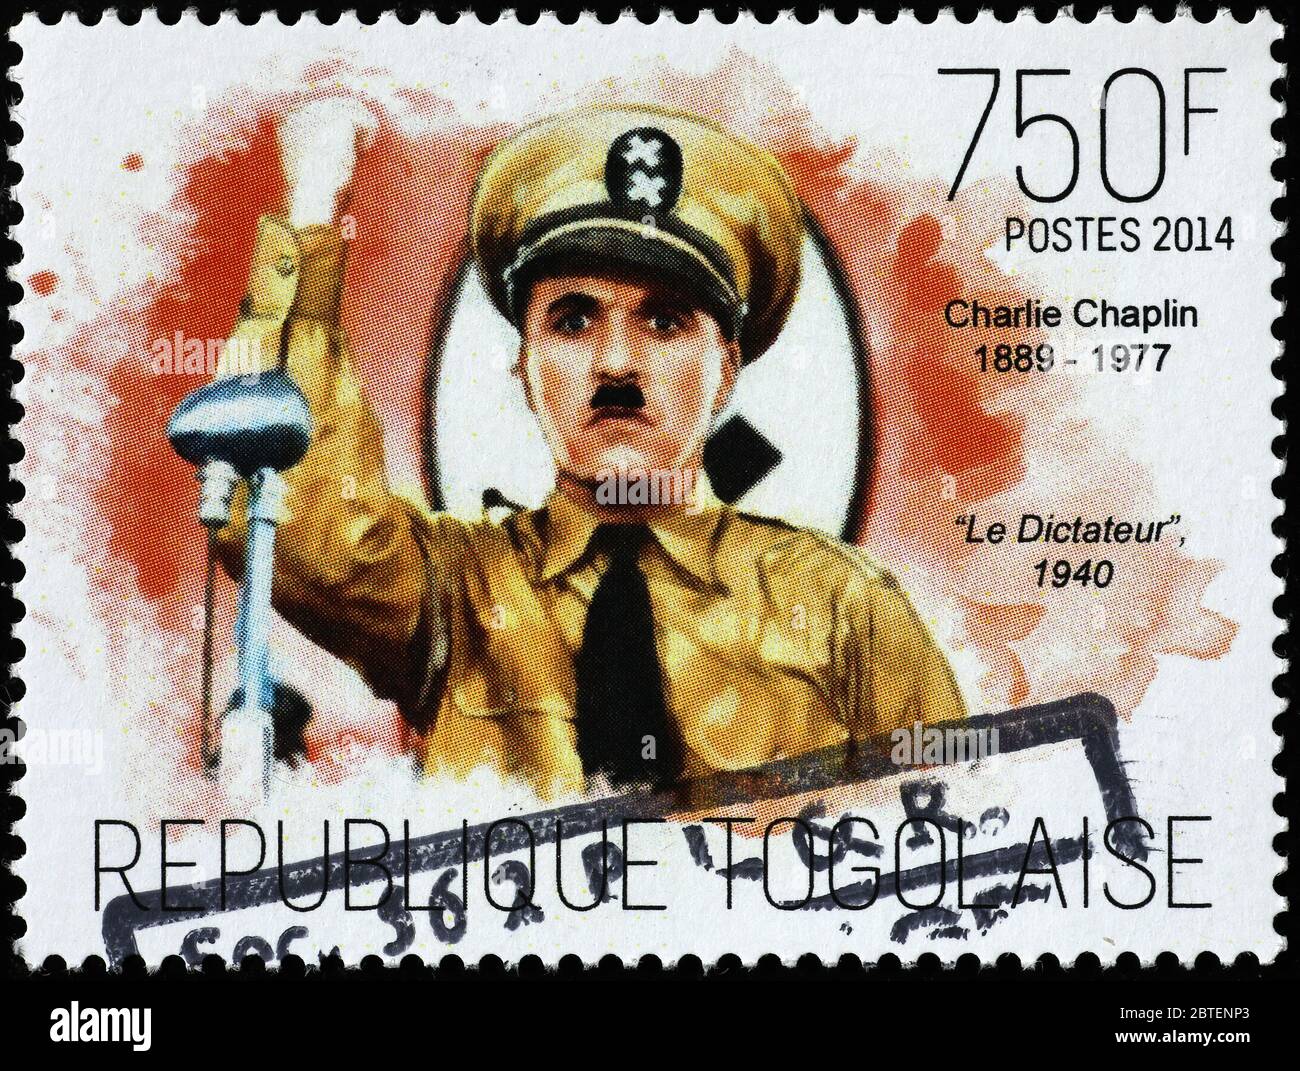 Charlie Chaplin in the Great Dictator on postage stamp Stock Photo